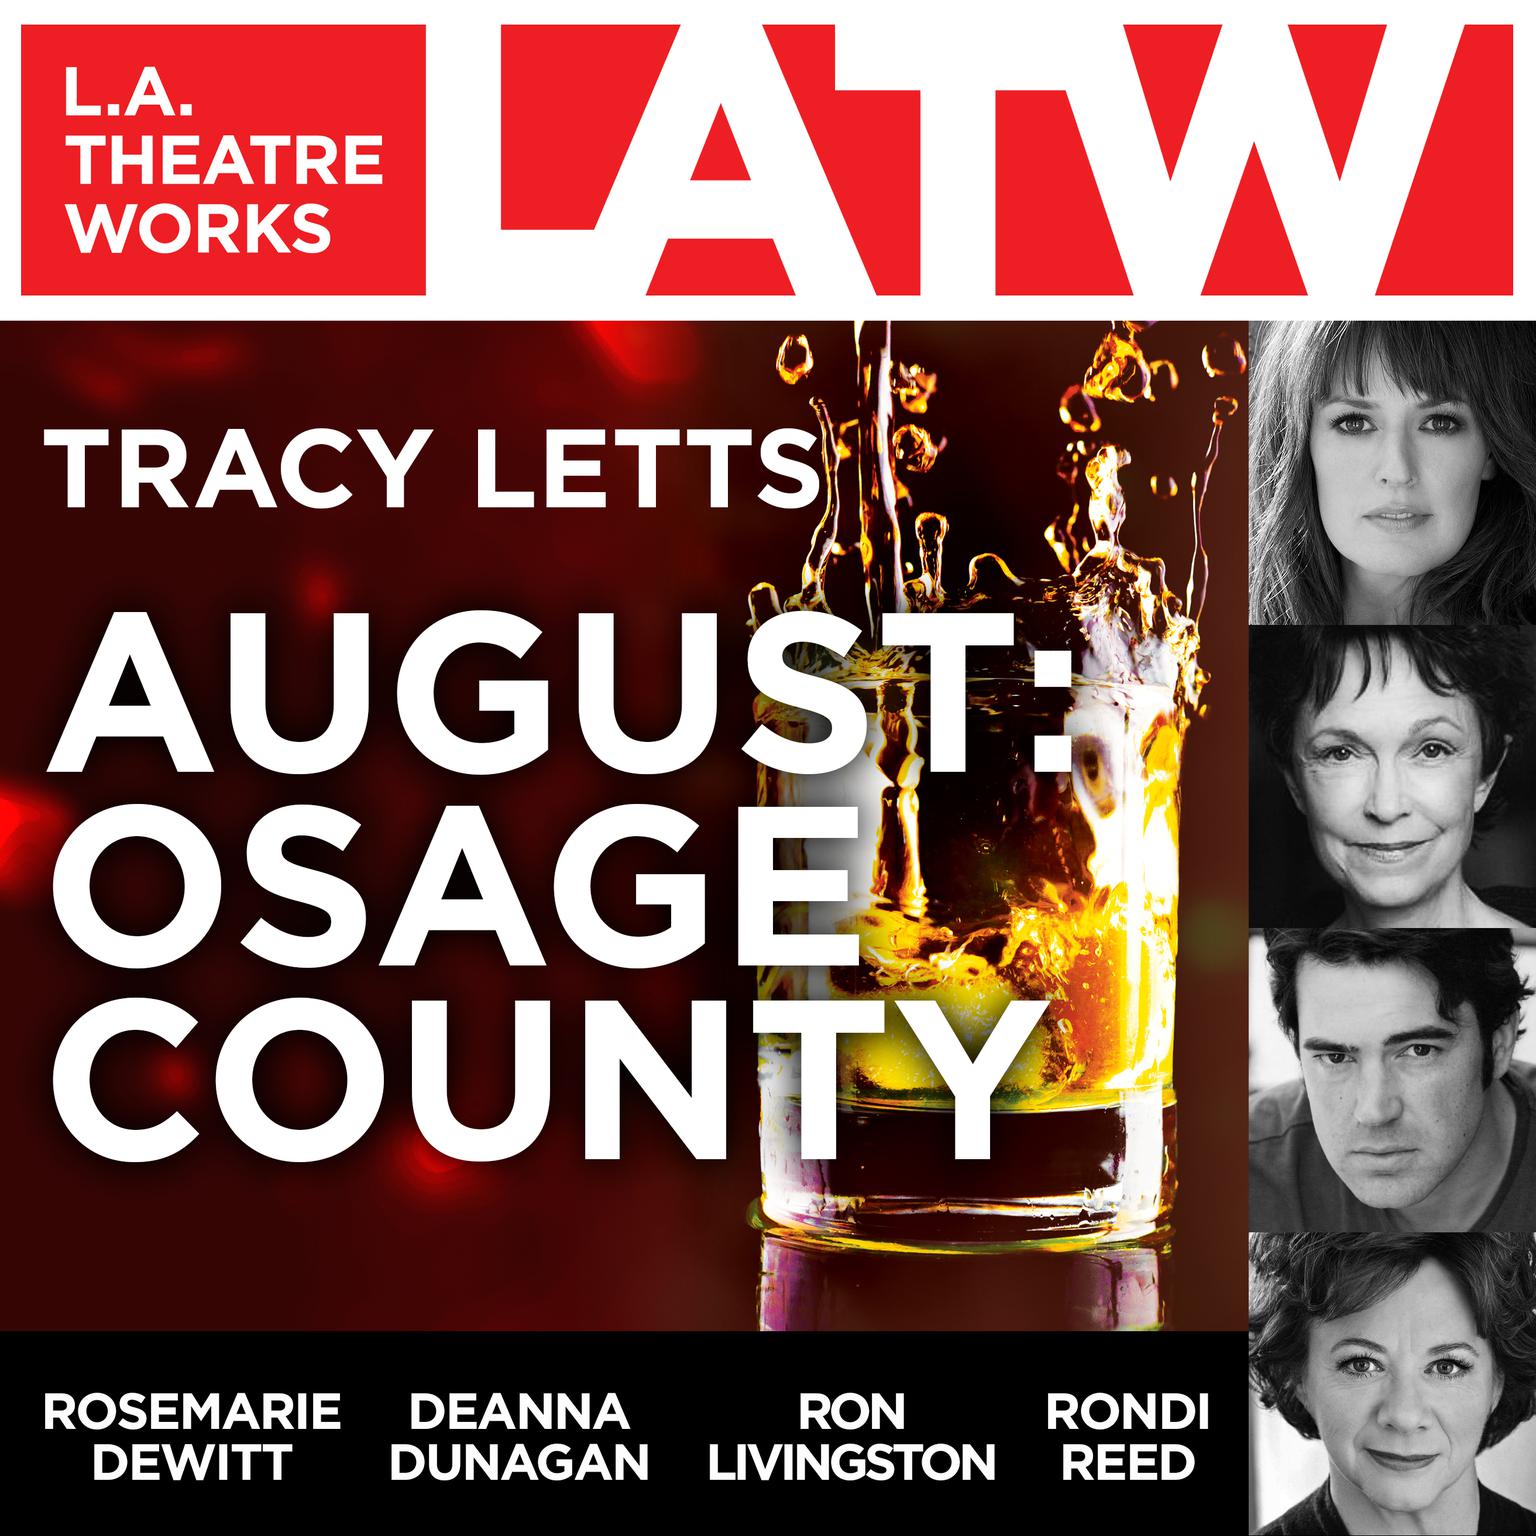 August: Osage County Audiobook, by Tracy Letts